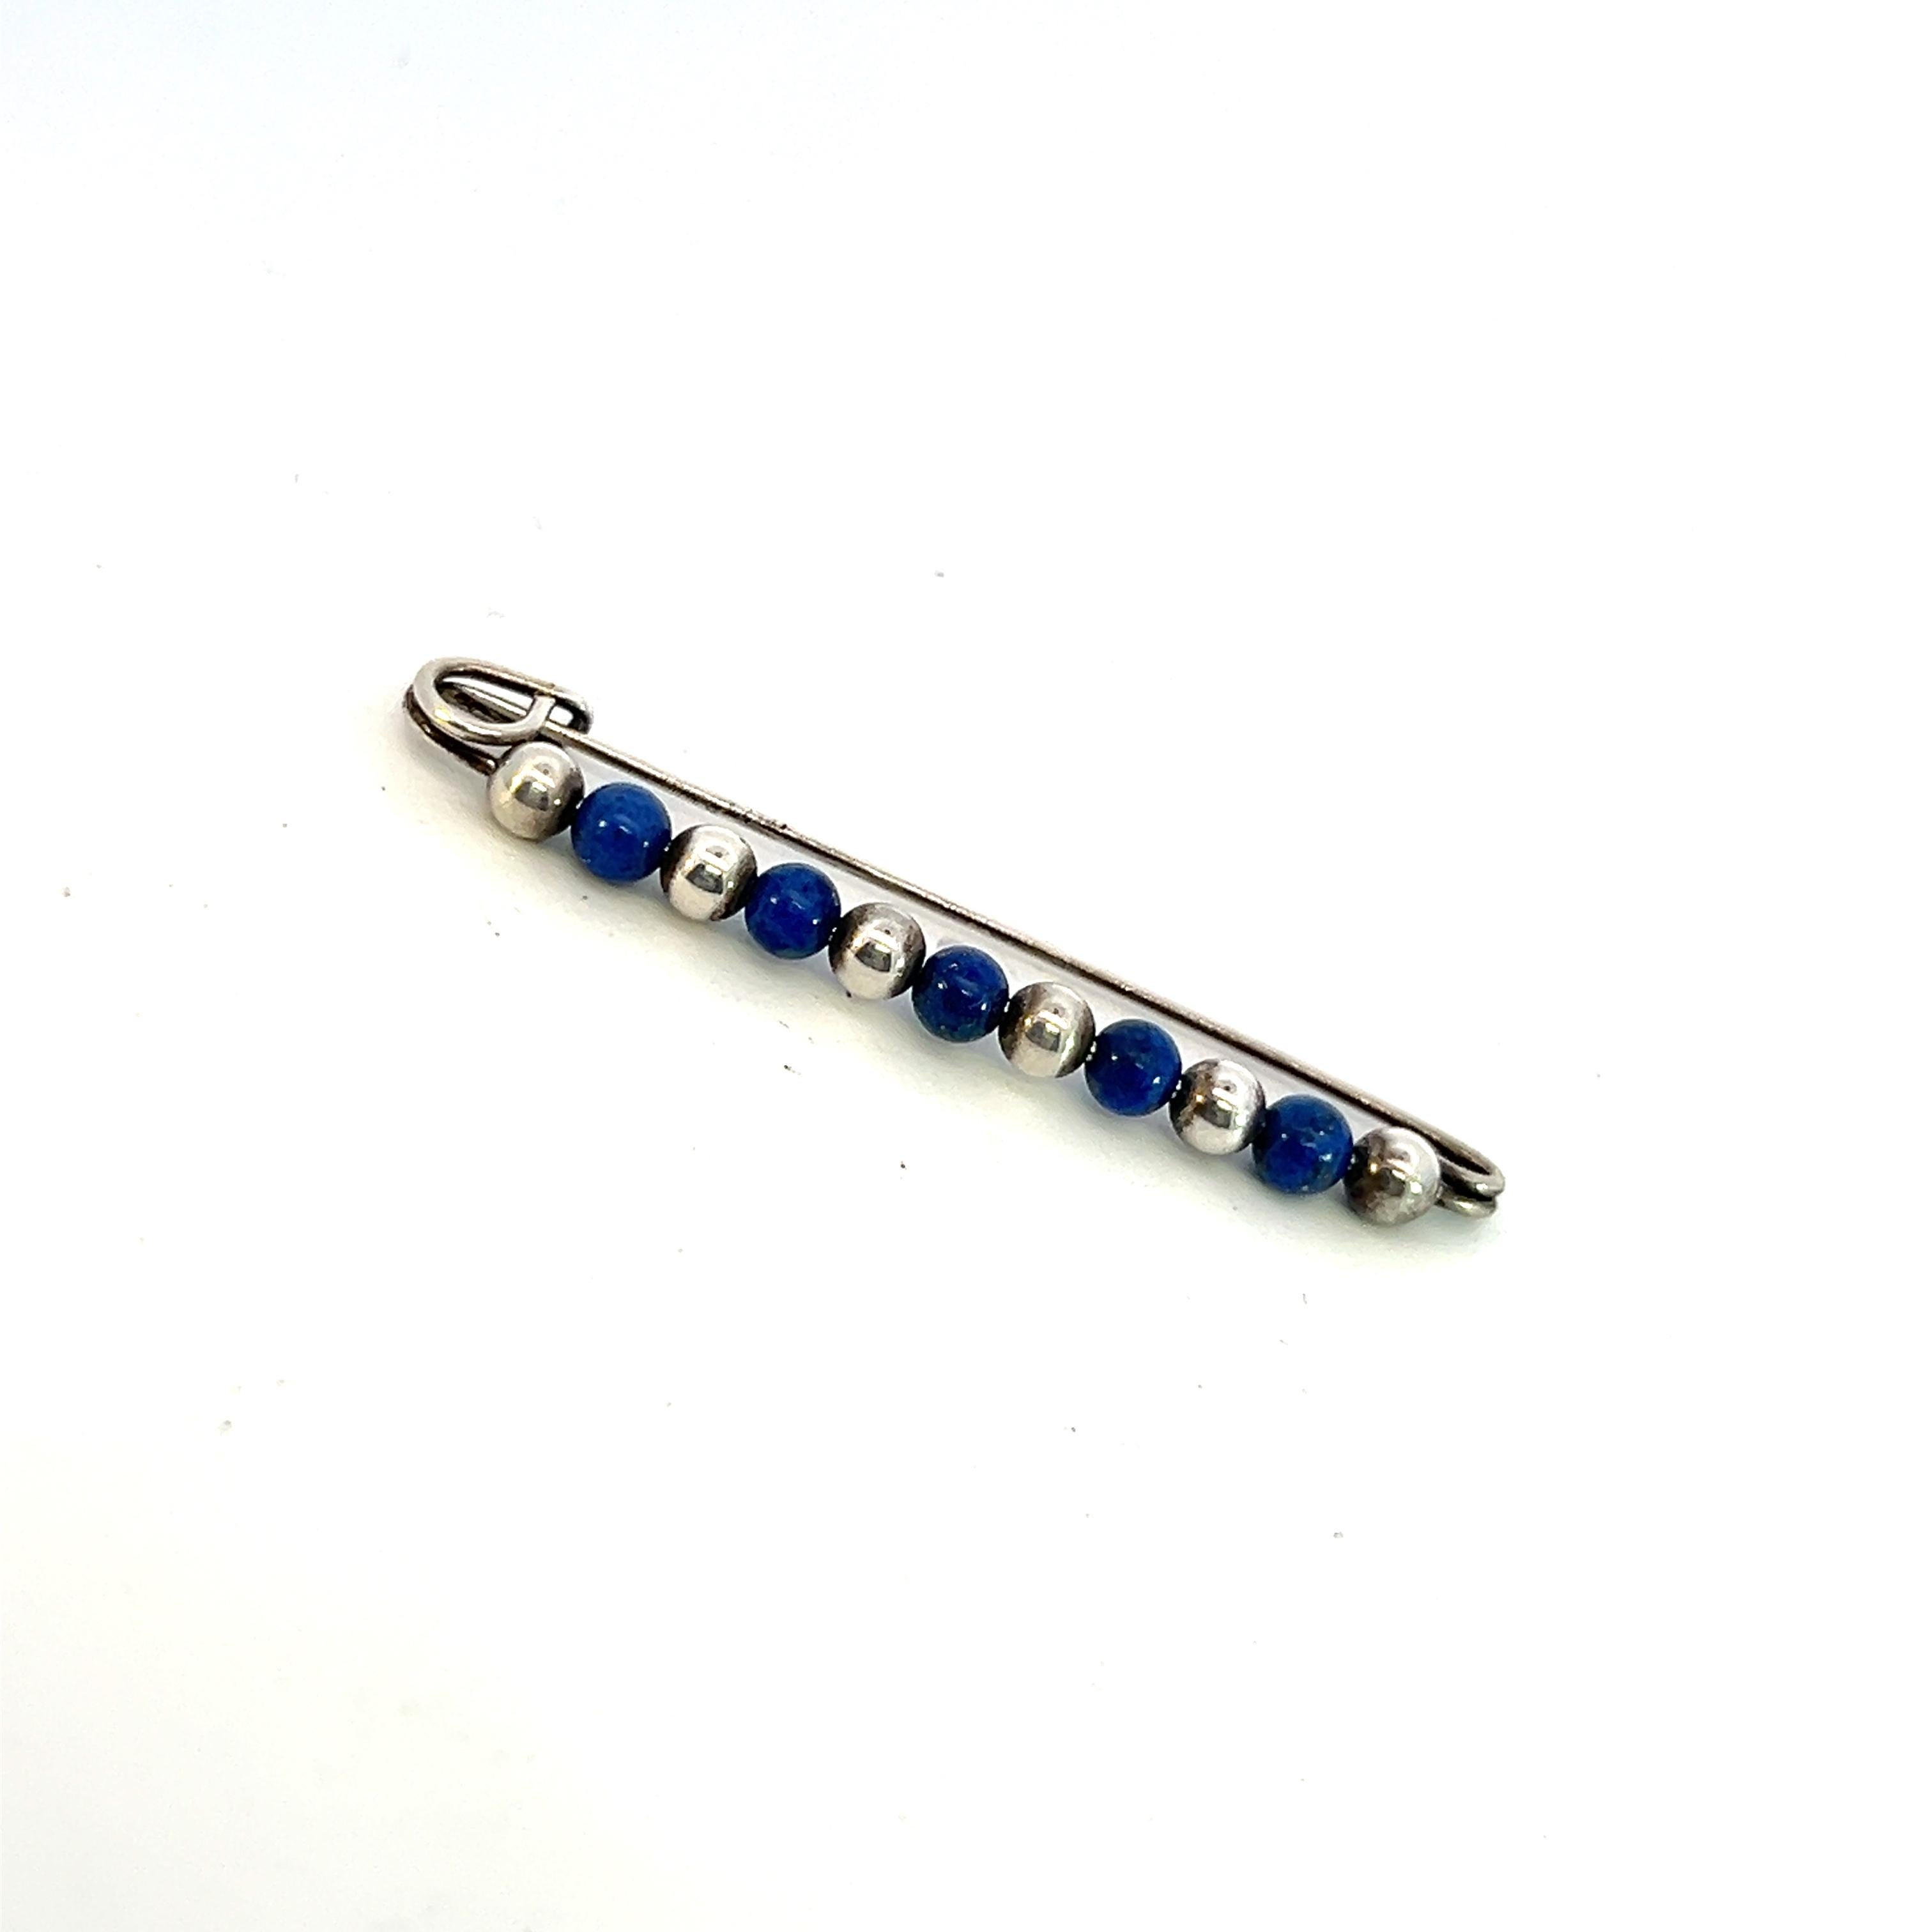 Authentic Tiffany & Co Estate Lapis Bobby Pin Brooch Sterling Silver 9 mm TIF617

This elegant Authentic Tiffany & Co brooch is made of Sterling Silver.

TRUSTED SELLER SINCE 2002

PLEASE SEE OUR HUNDREDS OF POSITIVE FEEDBACKS FROM OUR